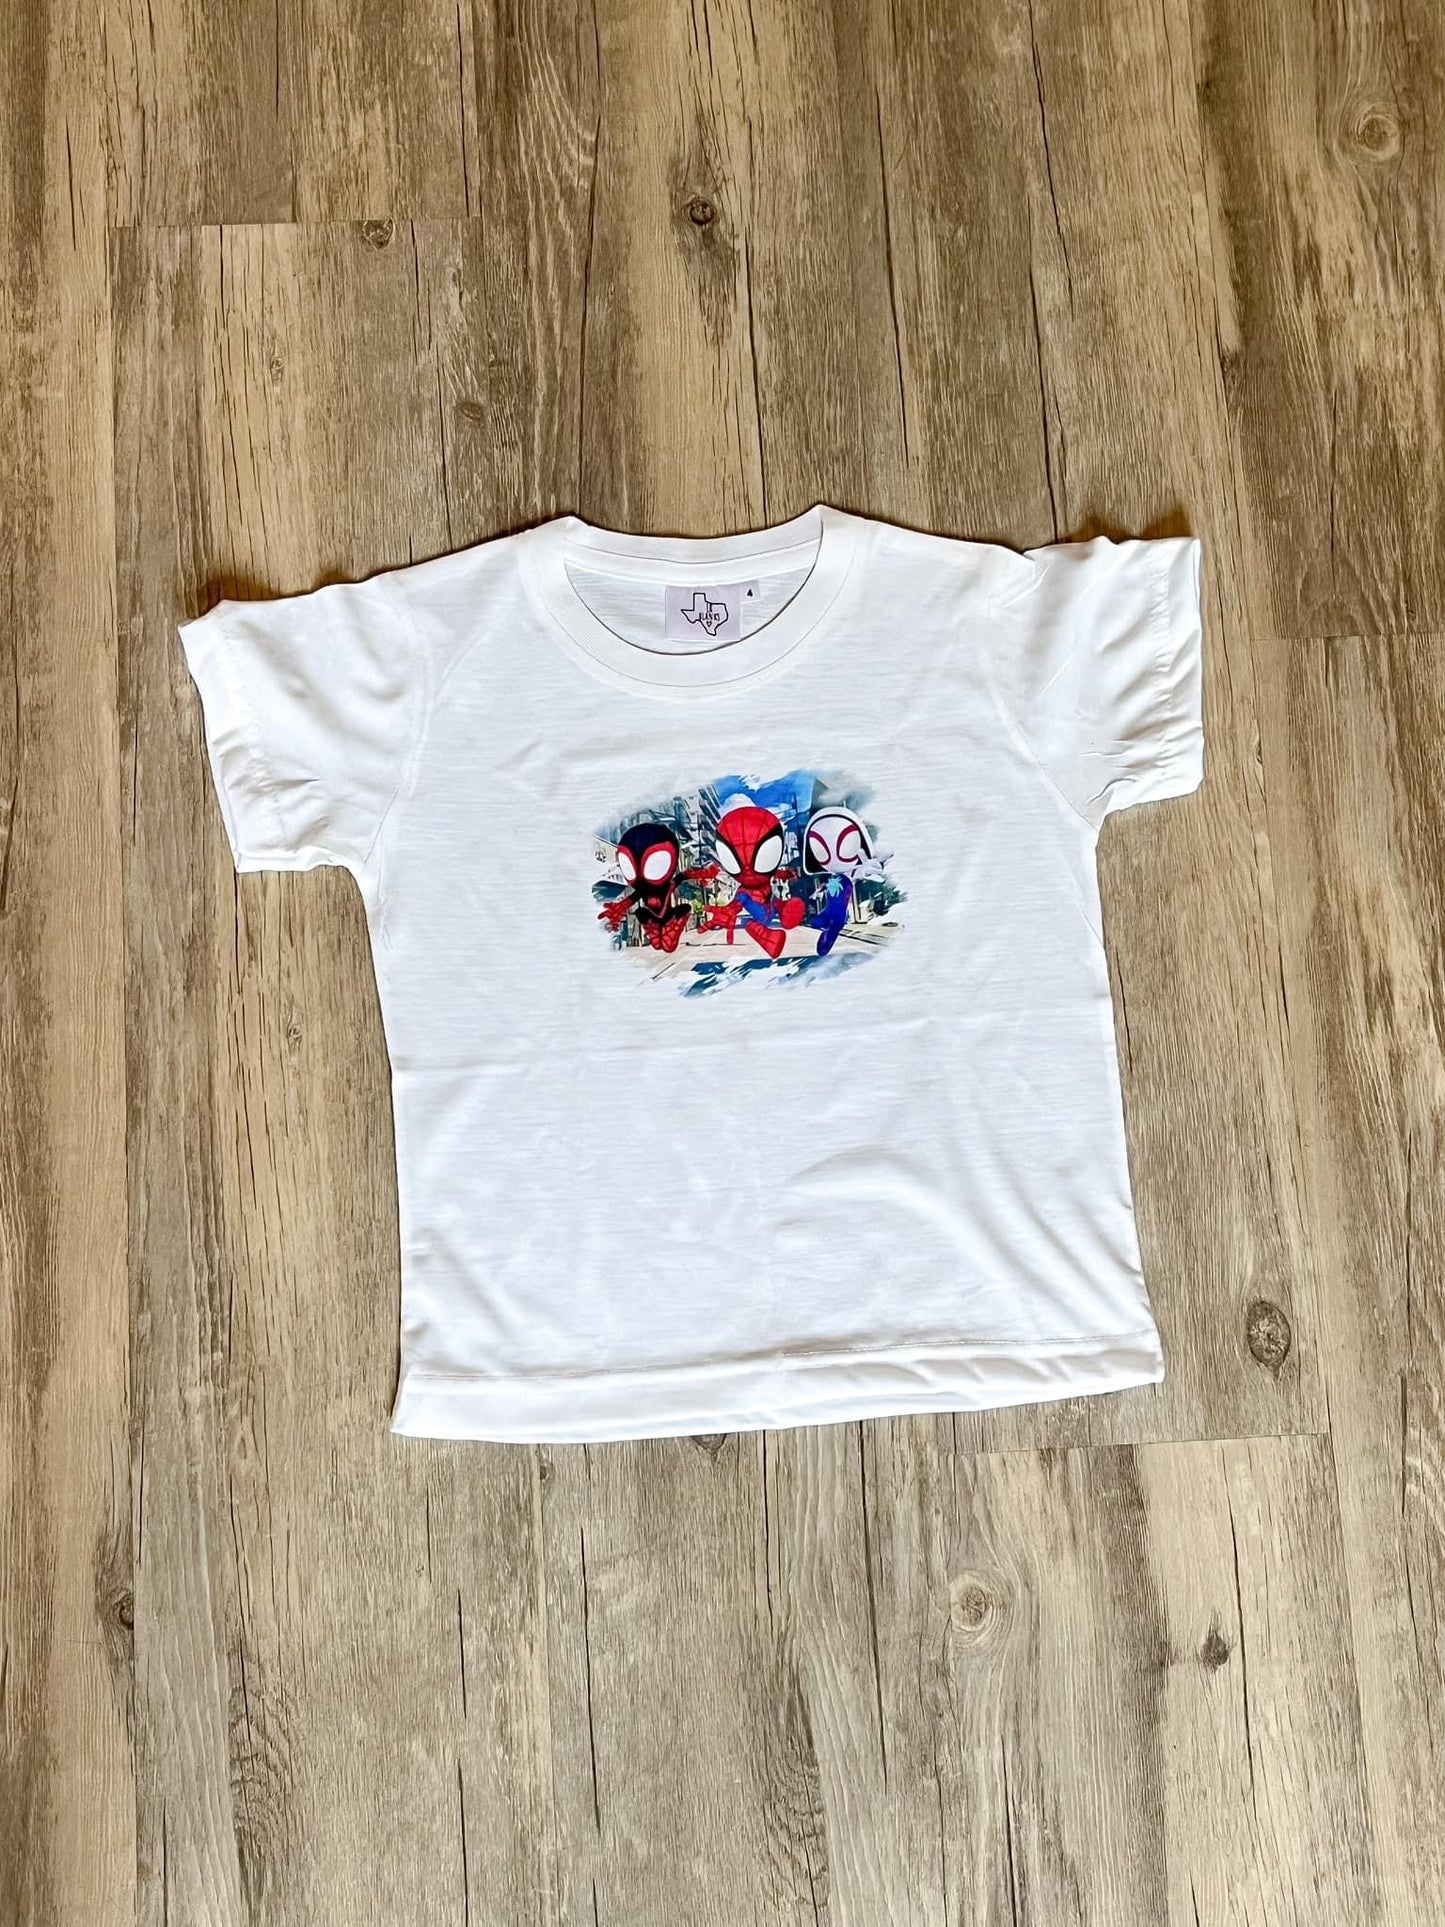 Spider and Friends Shirt